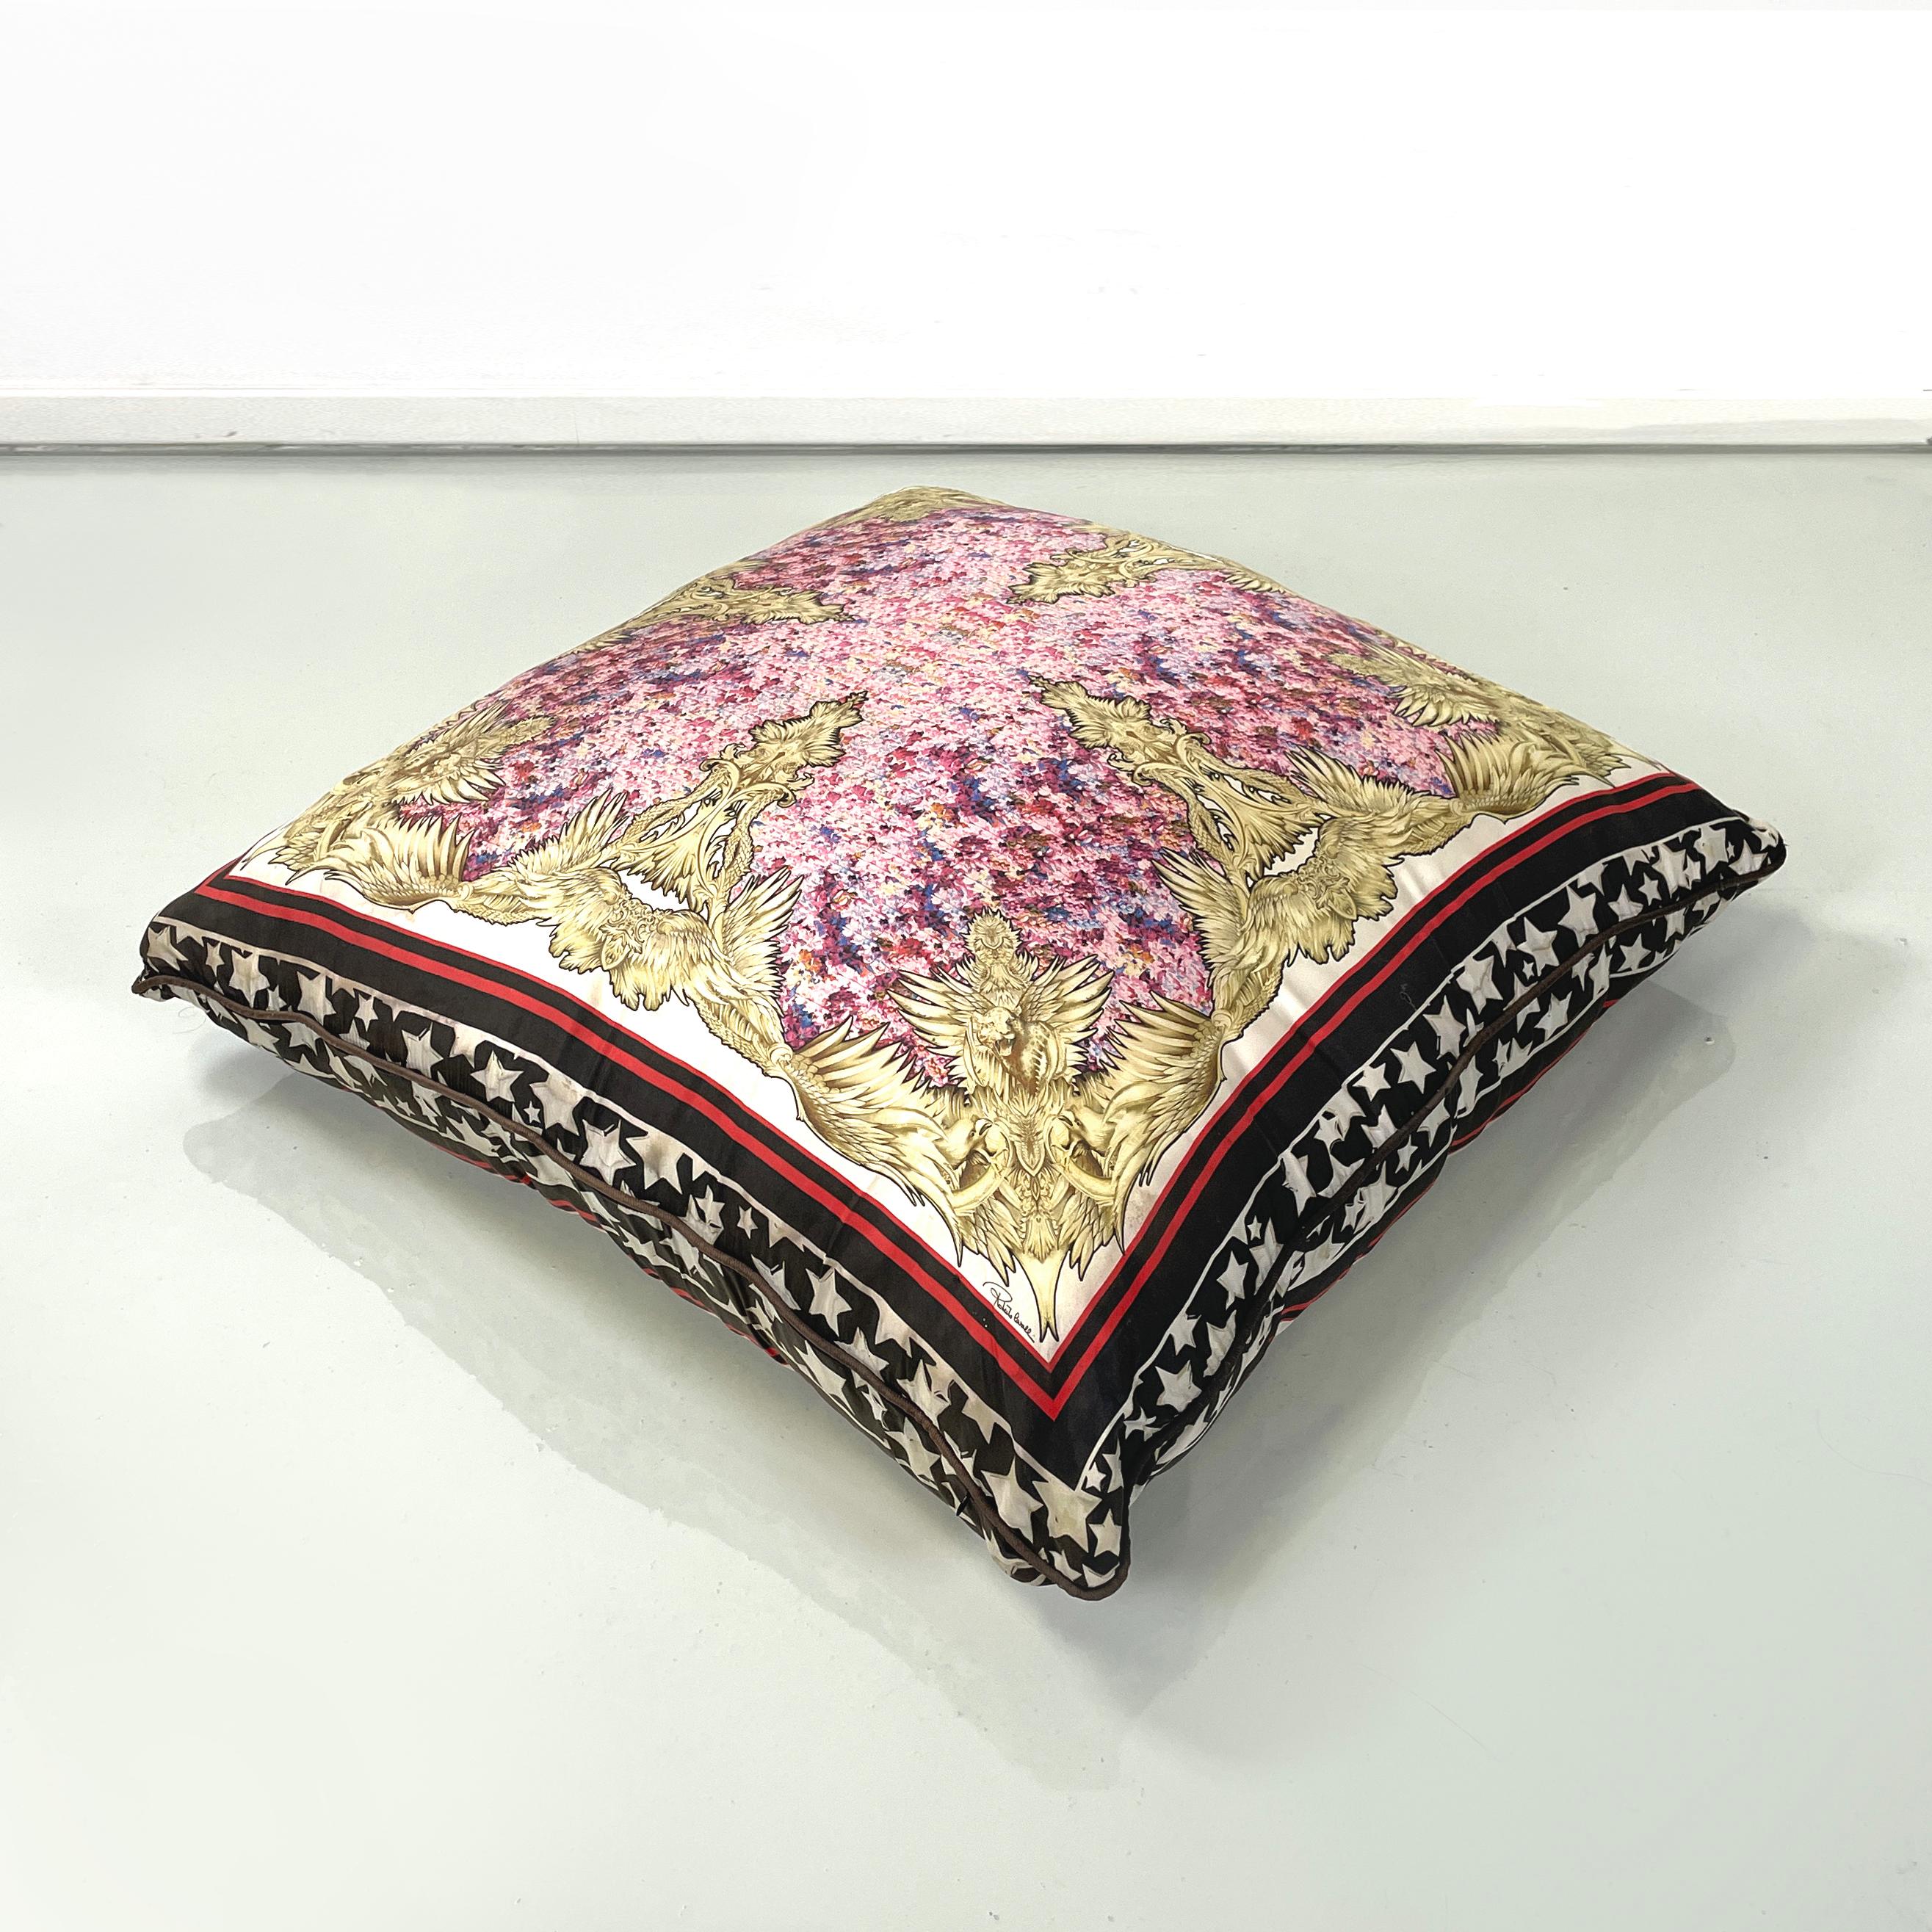 Italian post modern Fabric cushion with colored pattern by Roberto Cavalli, 2000s
Large square cushion in patterned fabric. In the center there is a floral decoration in pink-violet, framed by motifs of feathered wings and feline figures, in yellow.